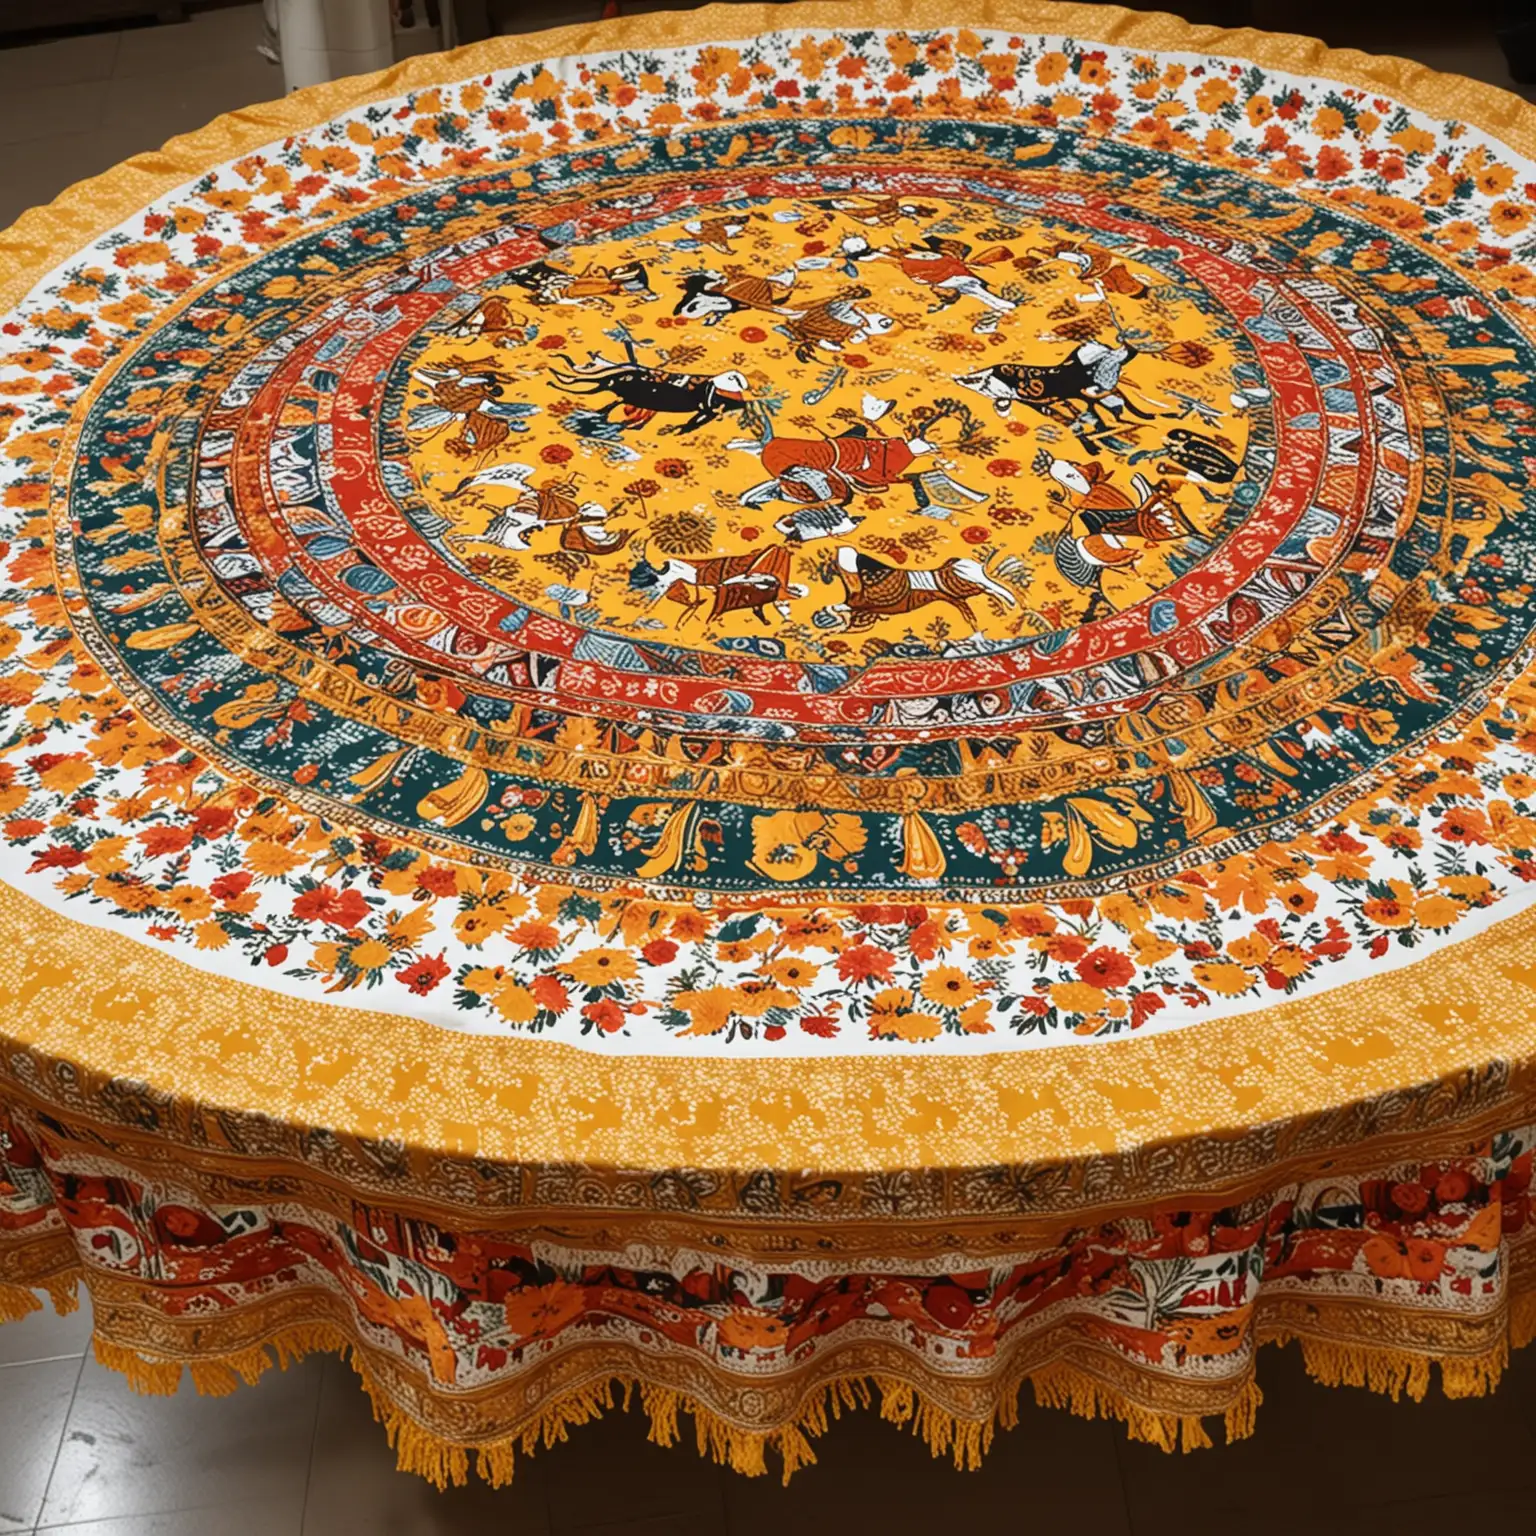 A table cover where its printed with indian designs for an event. The design on the fabric should be yellow and festival cows on it along with god krishna 